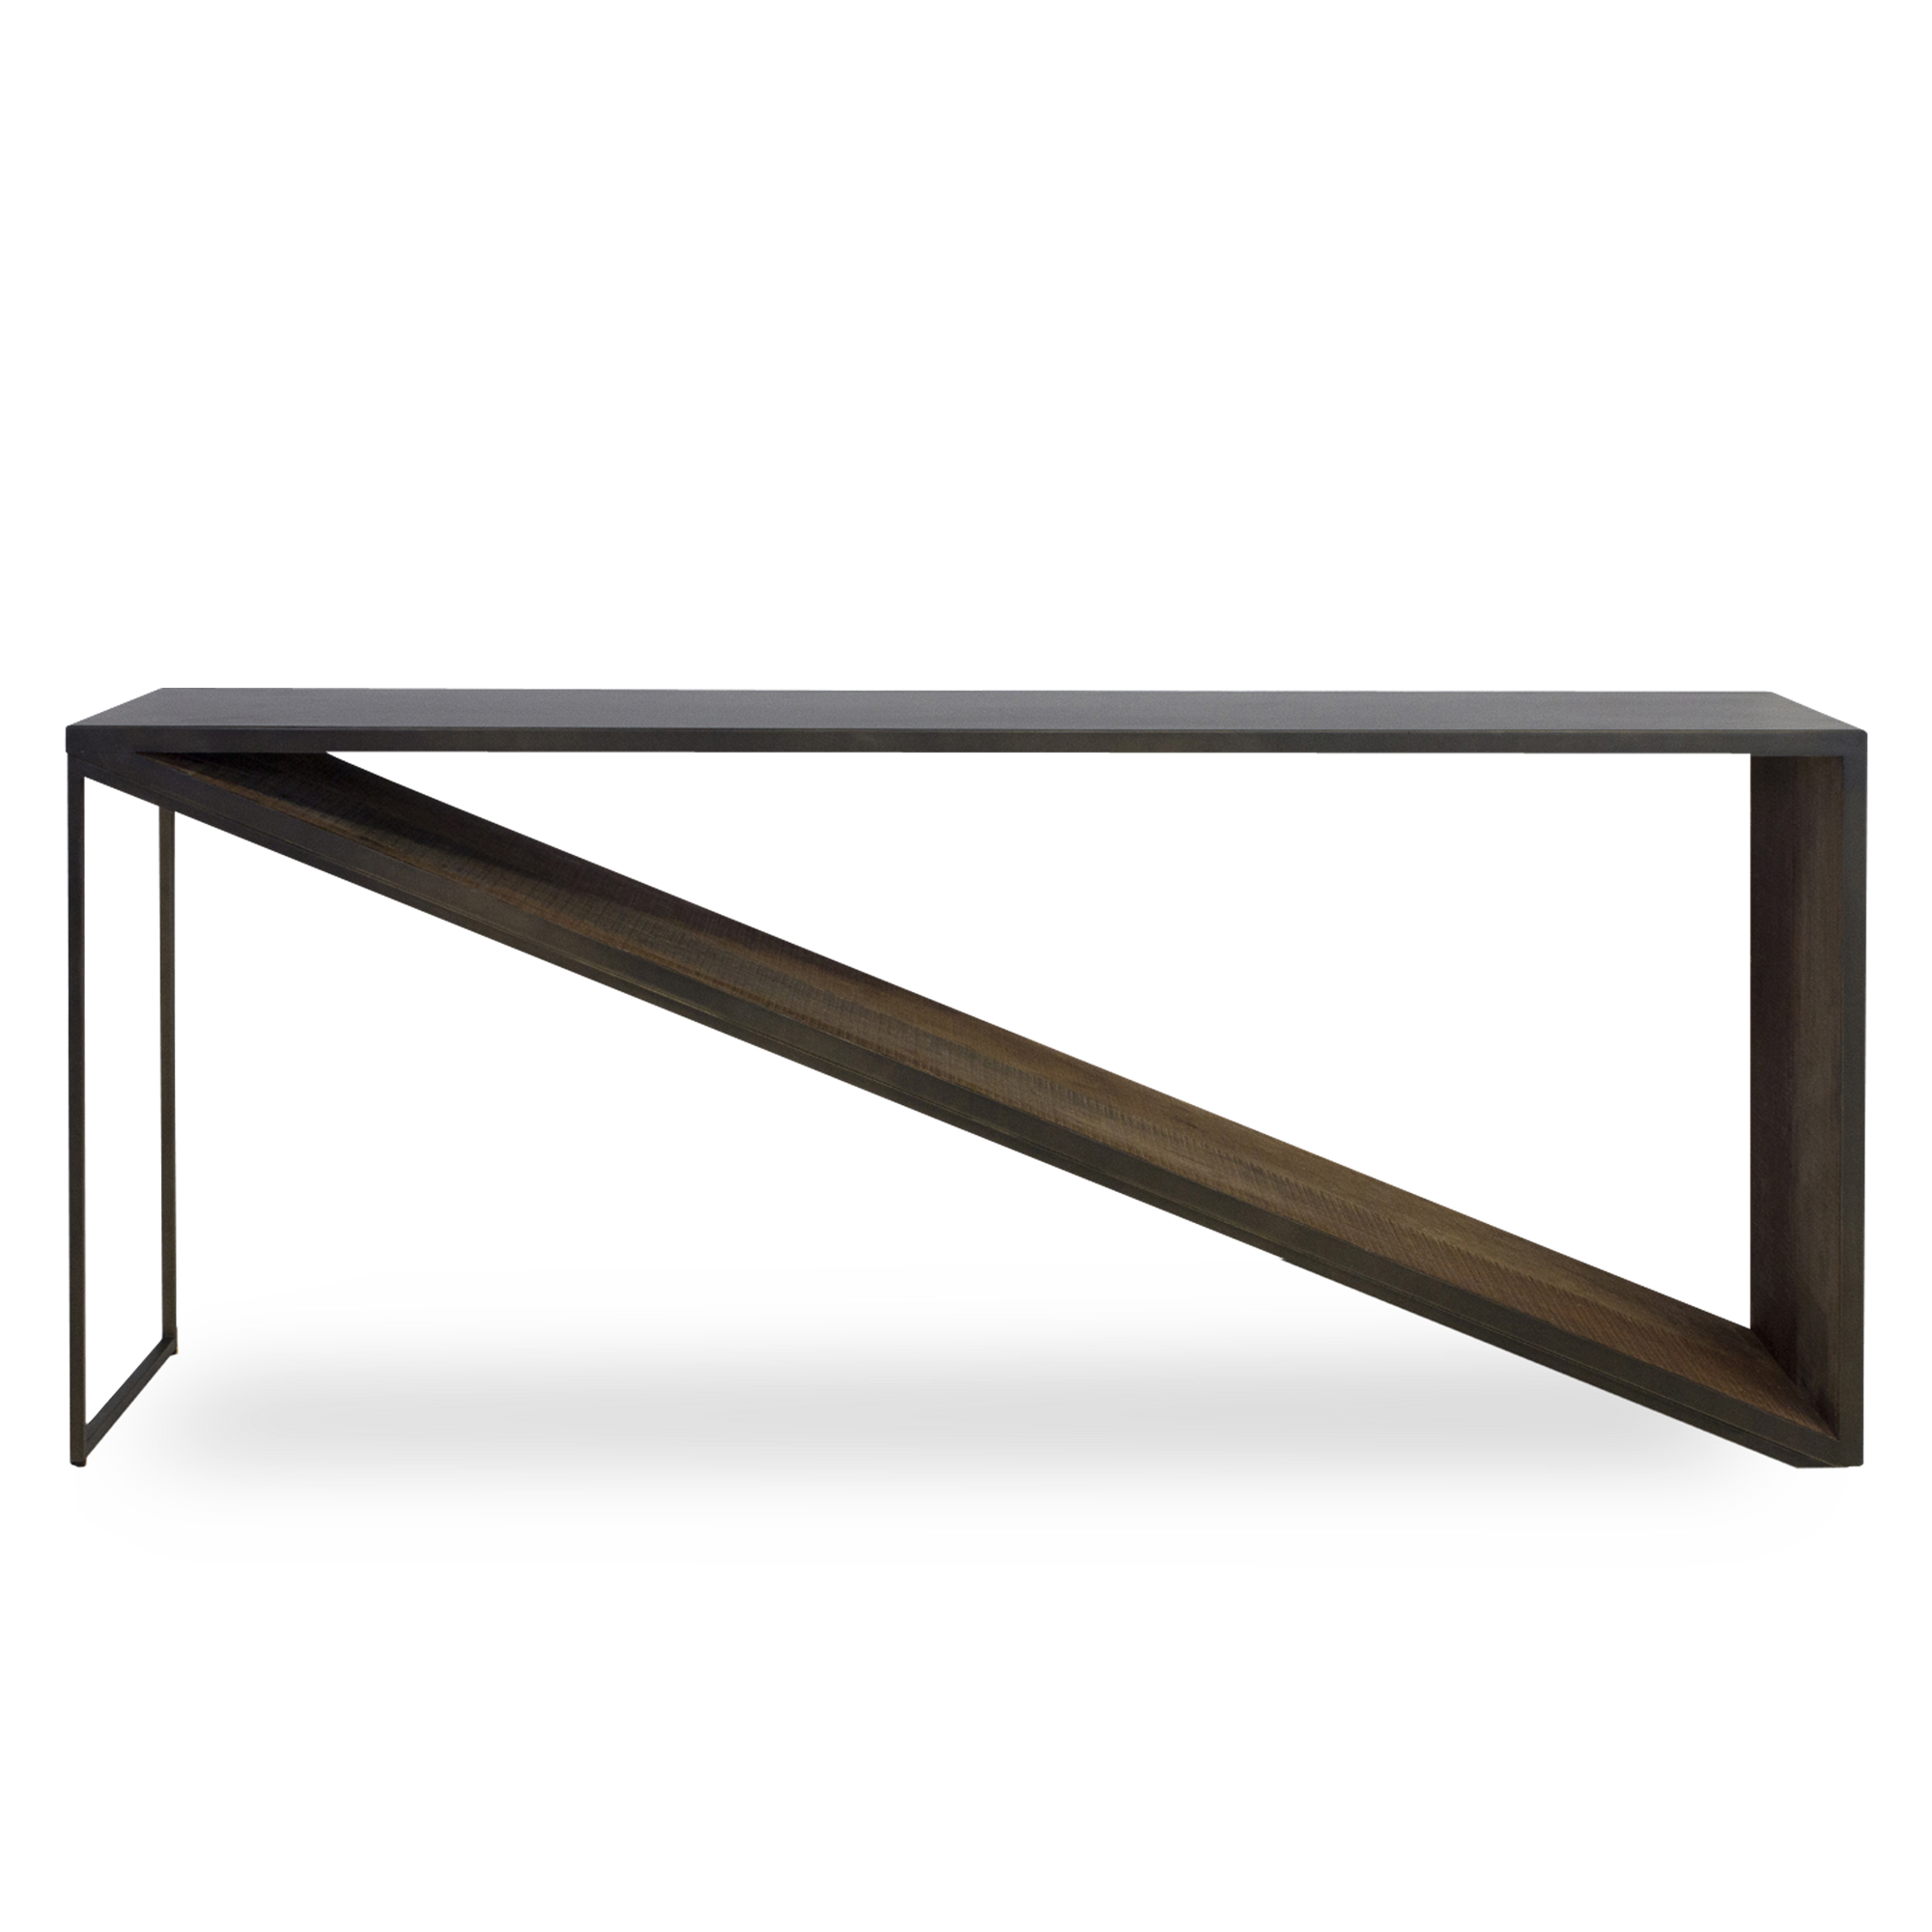 A unique console table crafted from Peroba wood, concrete, and steel.